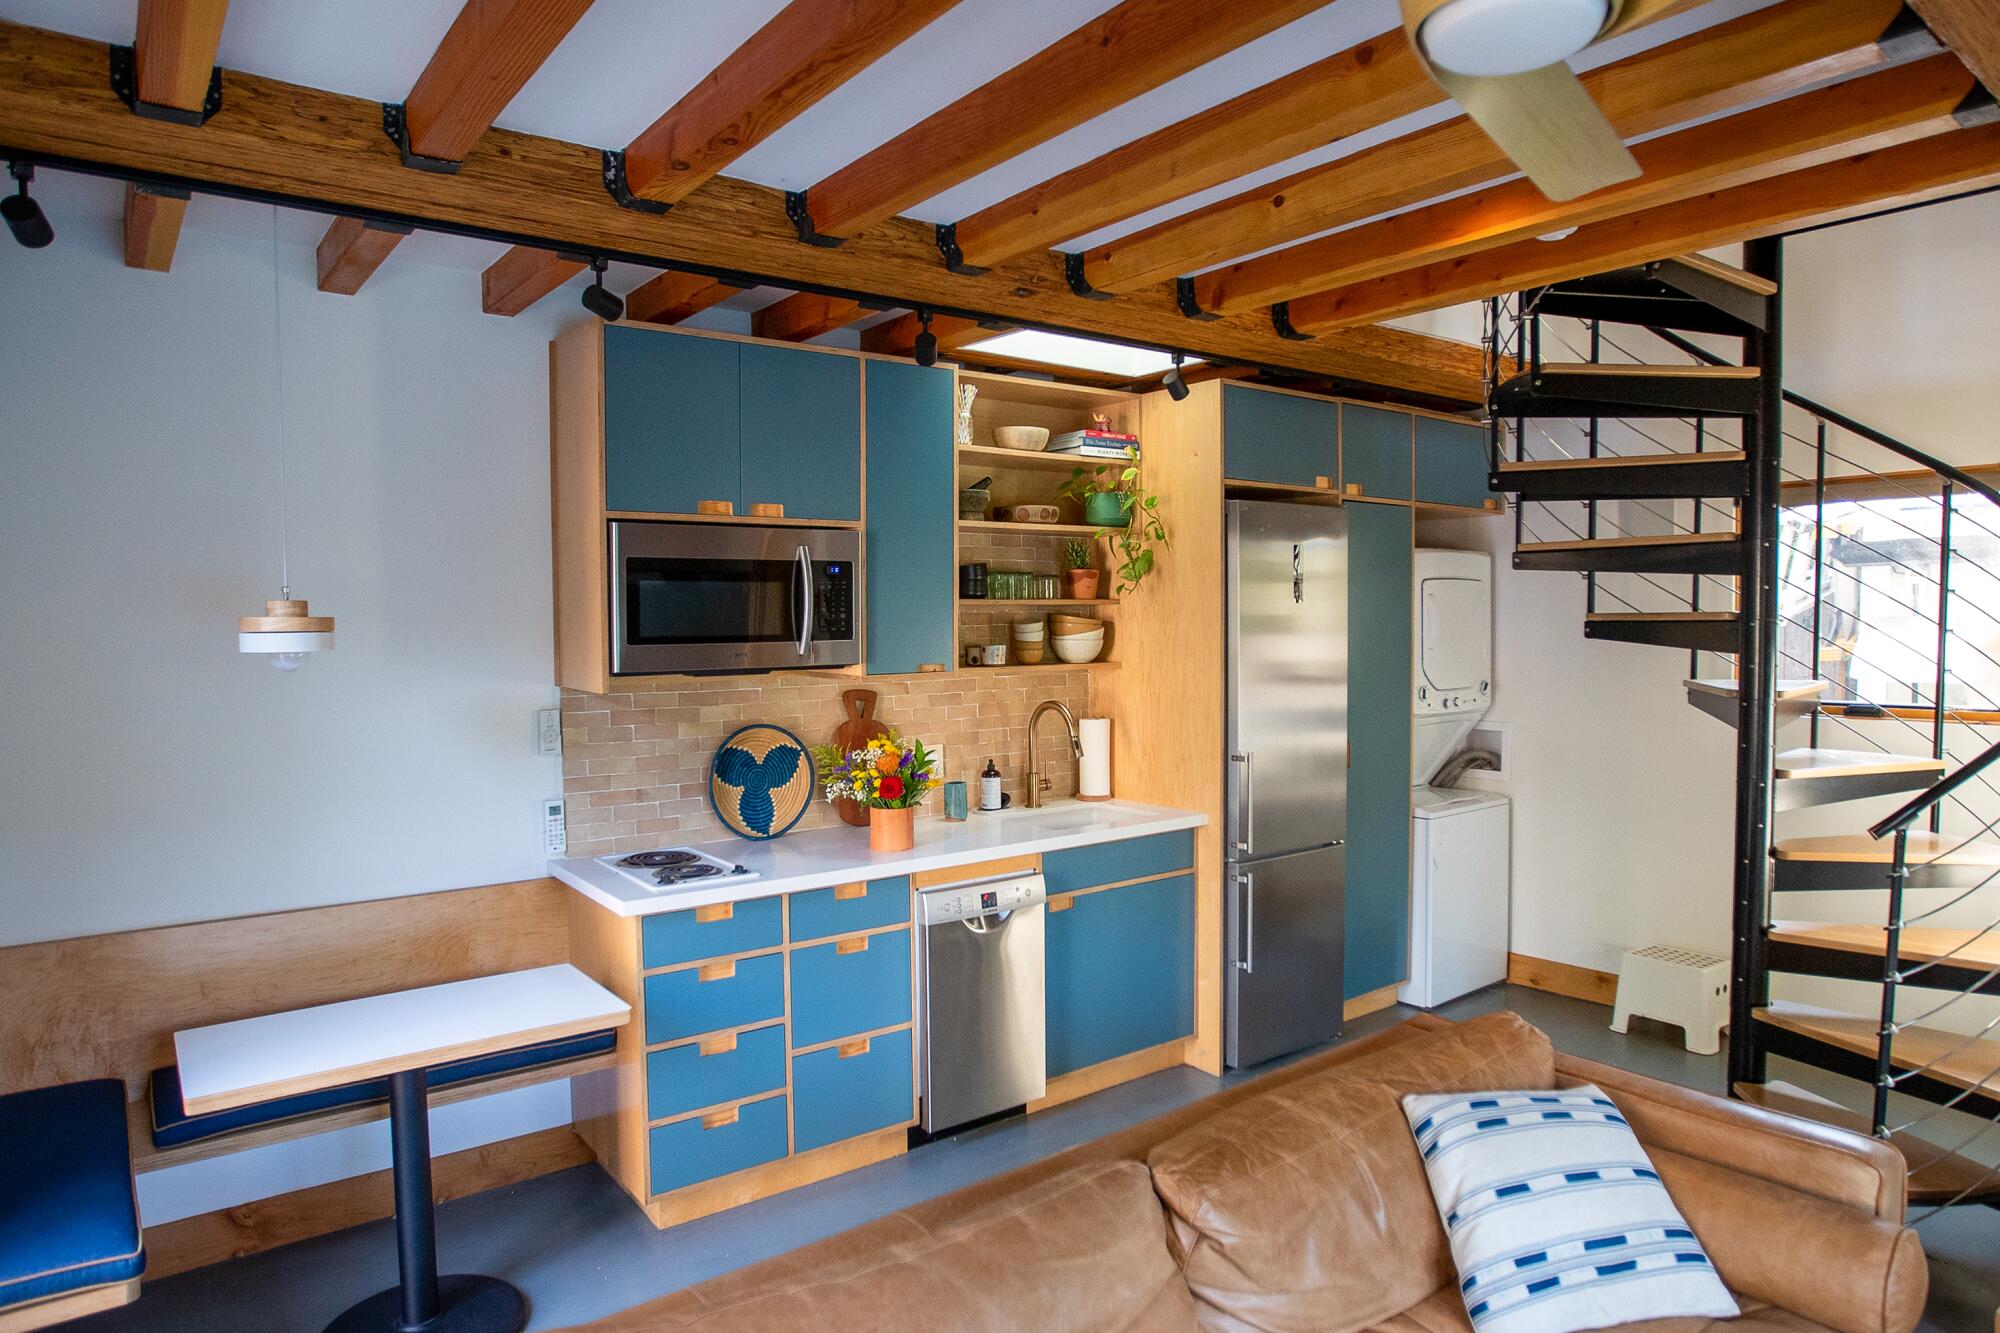 A kitchen with blue cabinets and a spiral staircase